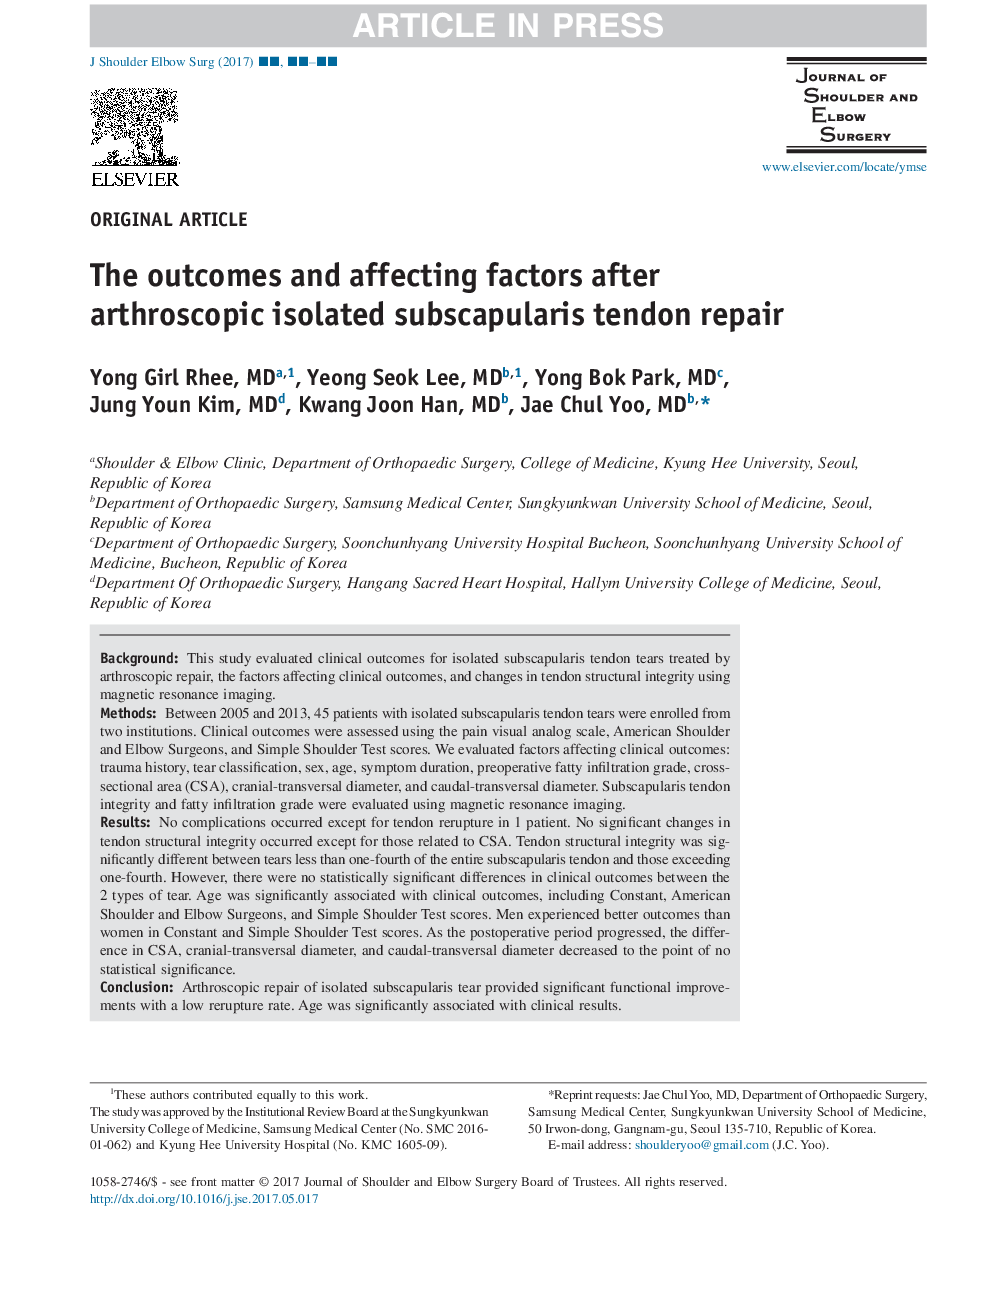 The outcomes and affecting factors after arthroscopic isolated subscapularis tendon repair